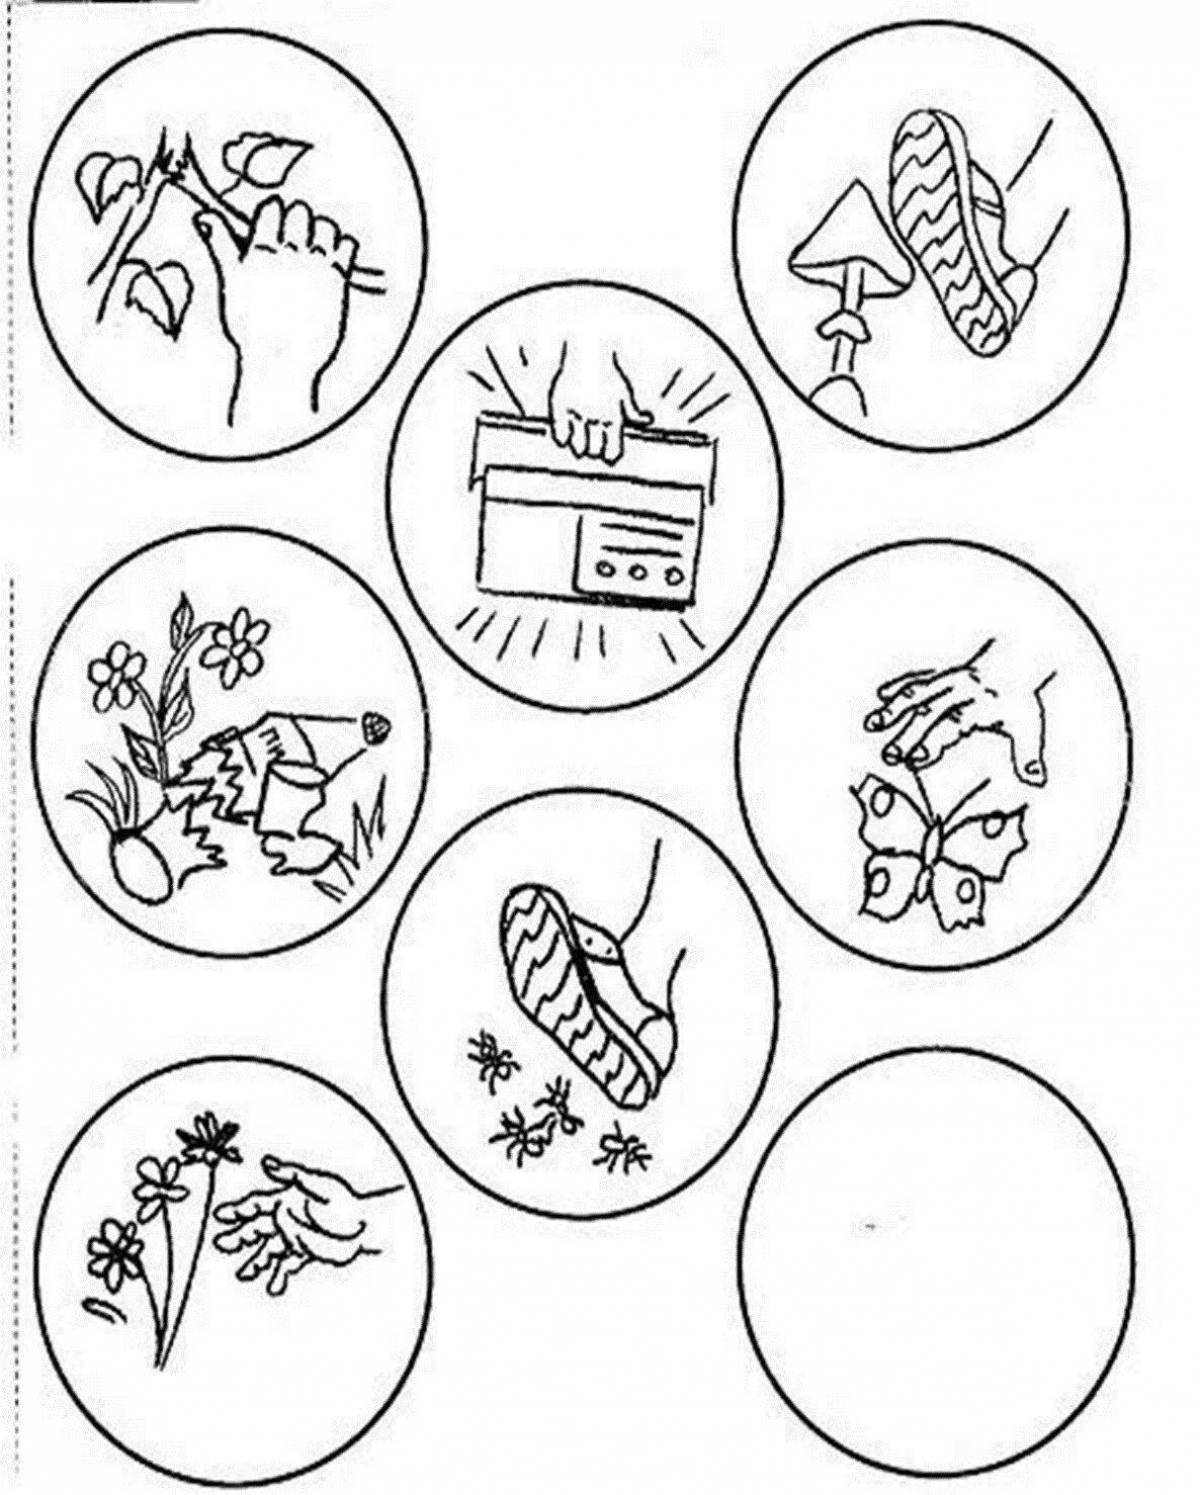 Exquisite coloring page save nature